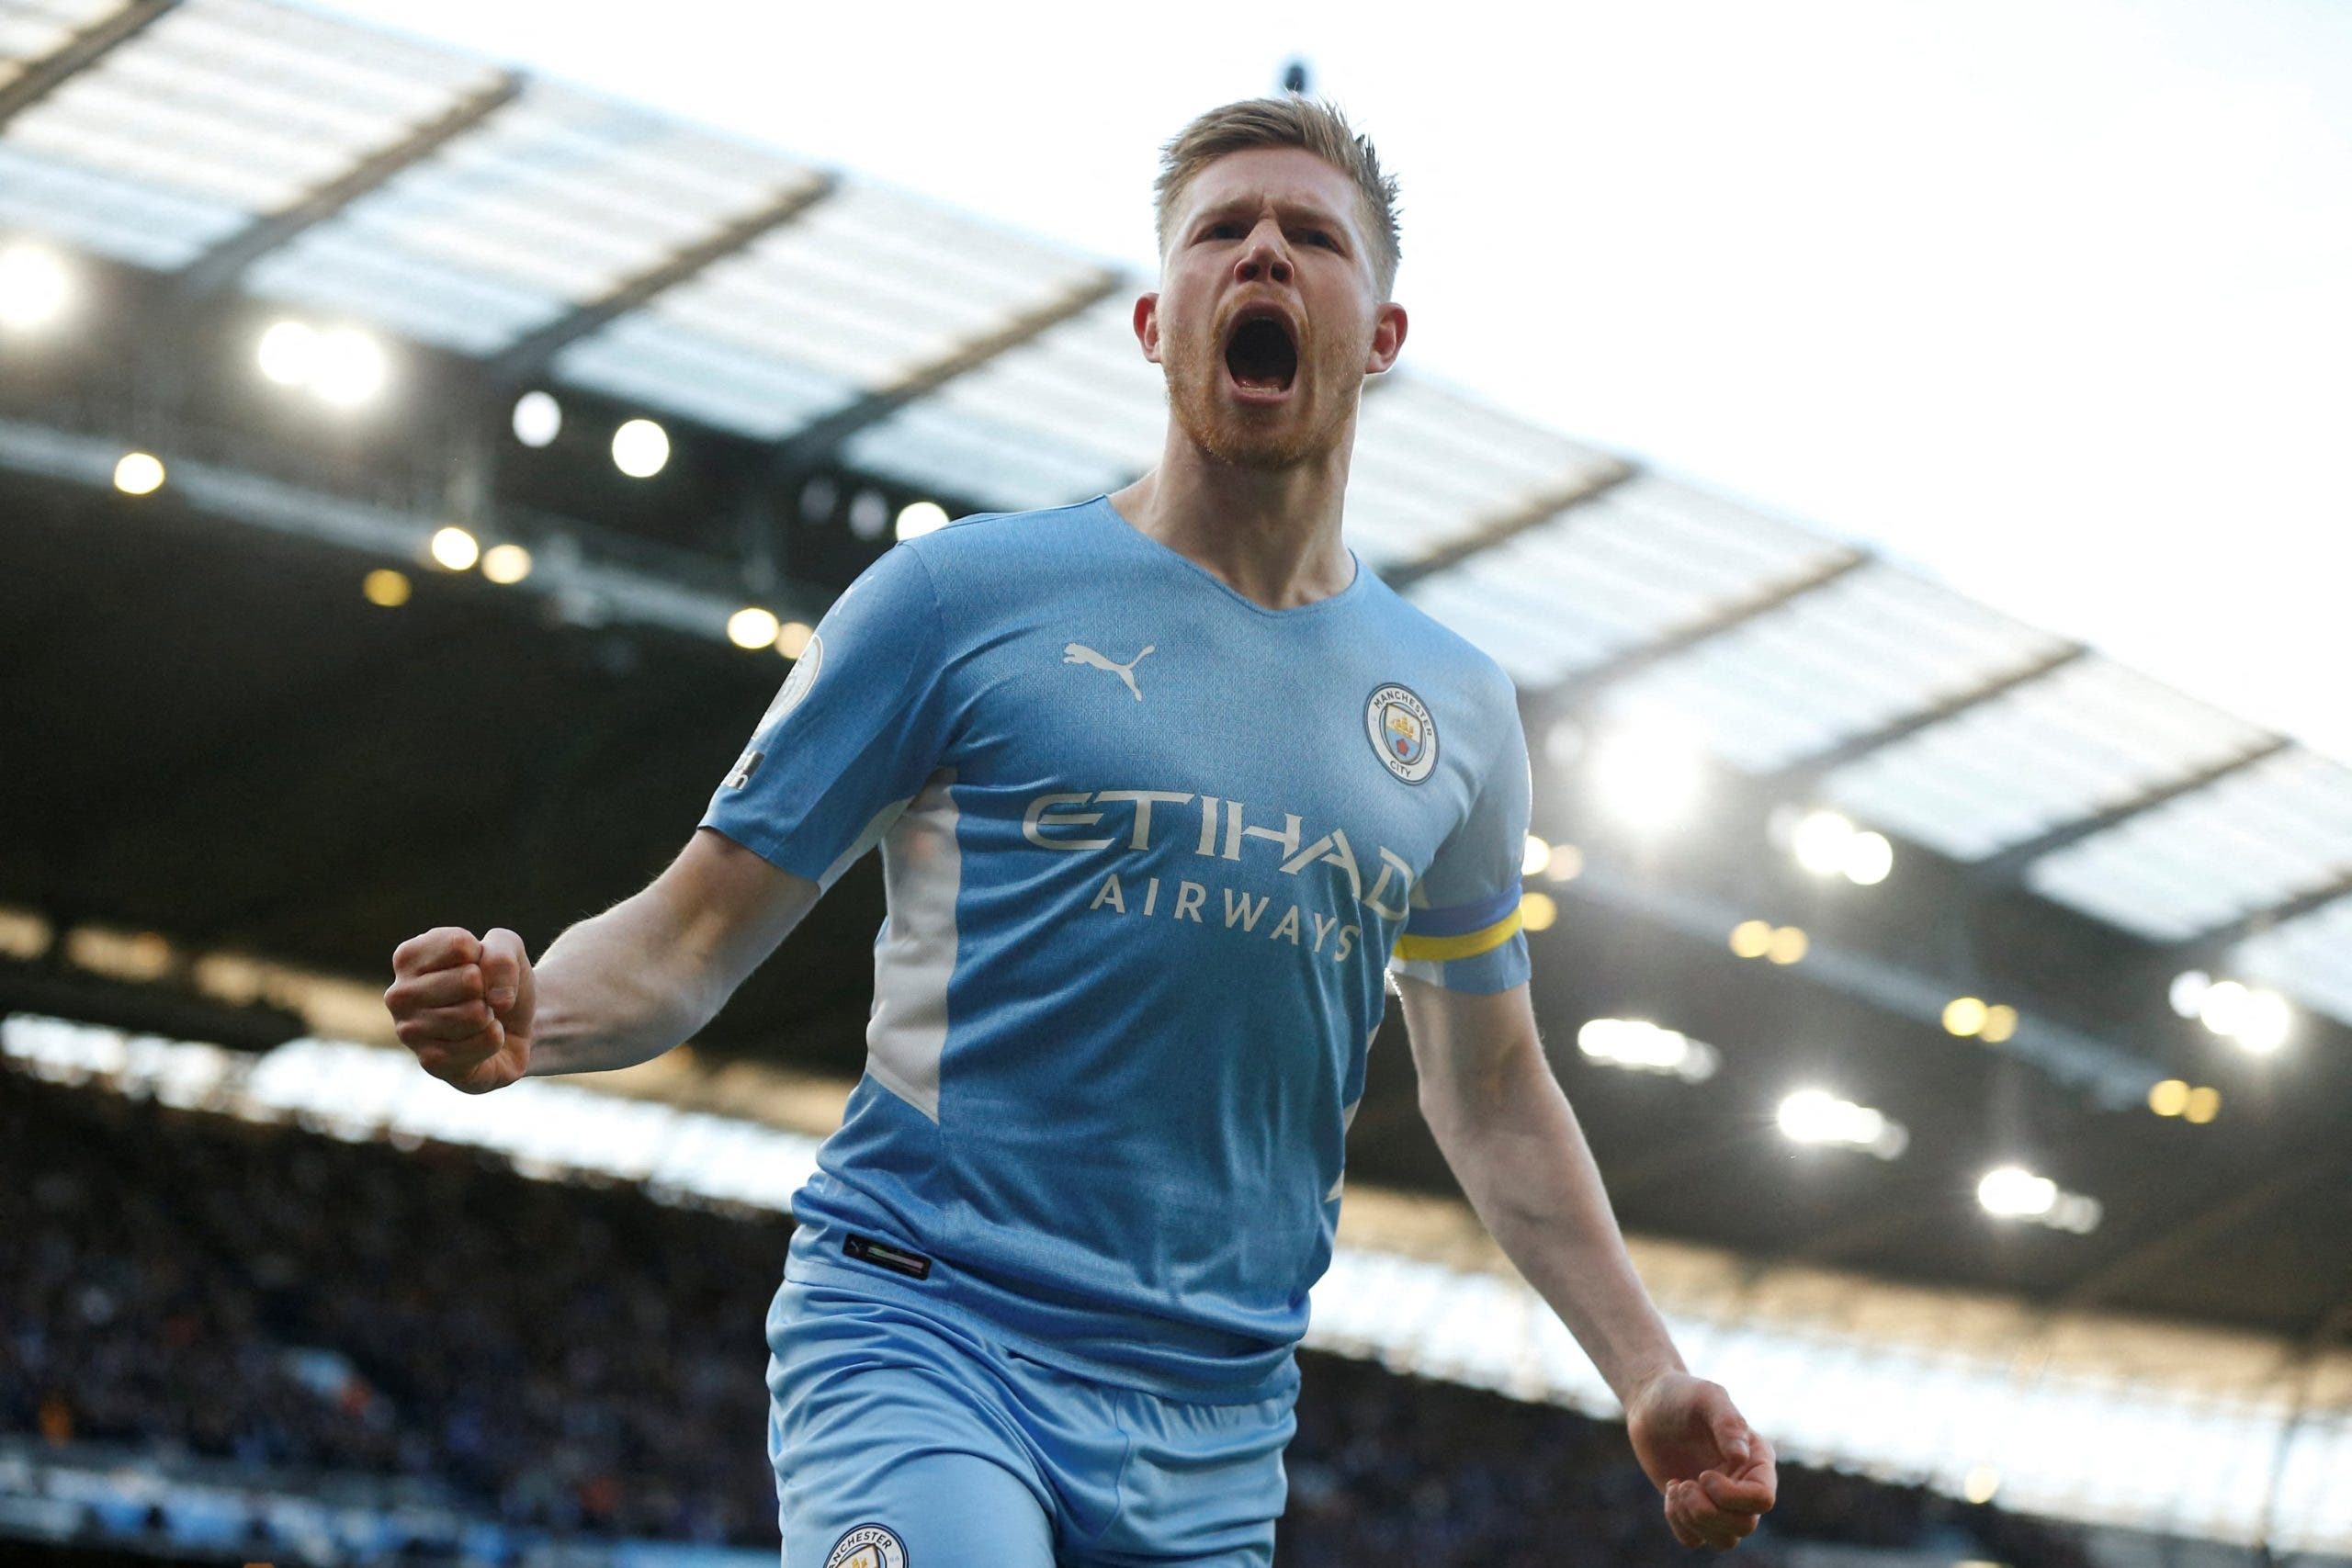 Real Madrid offers crack to City to sign De Bruyne
